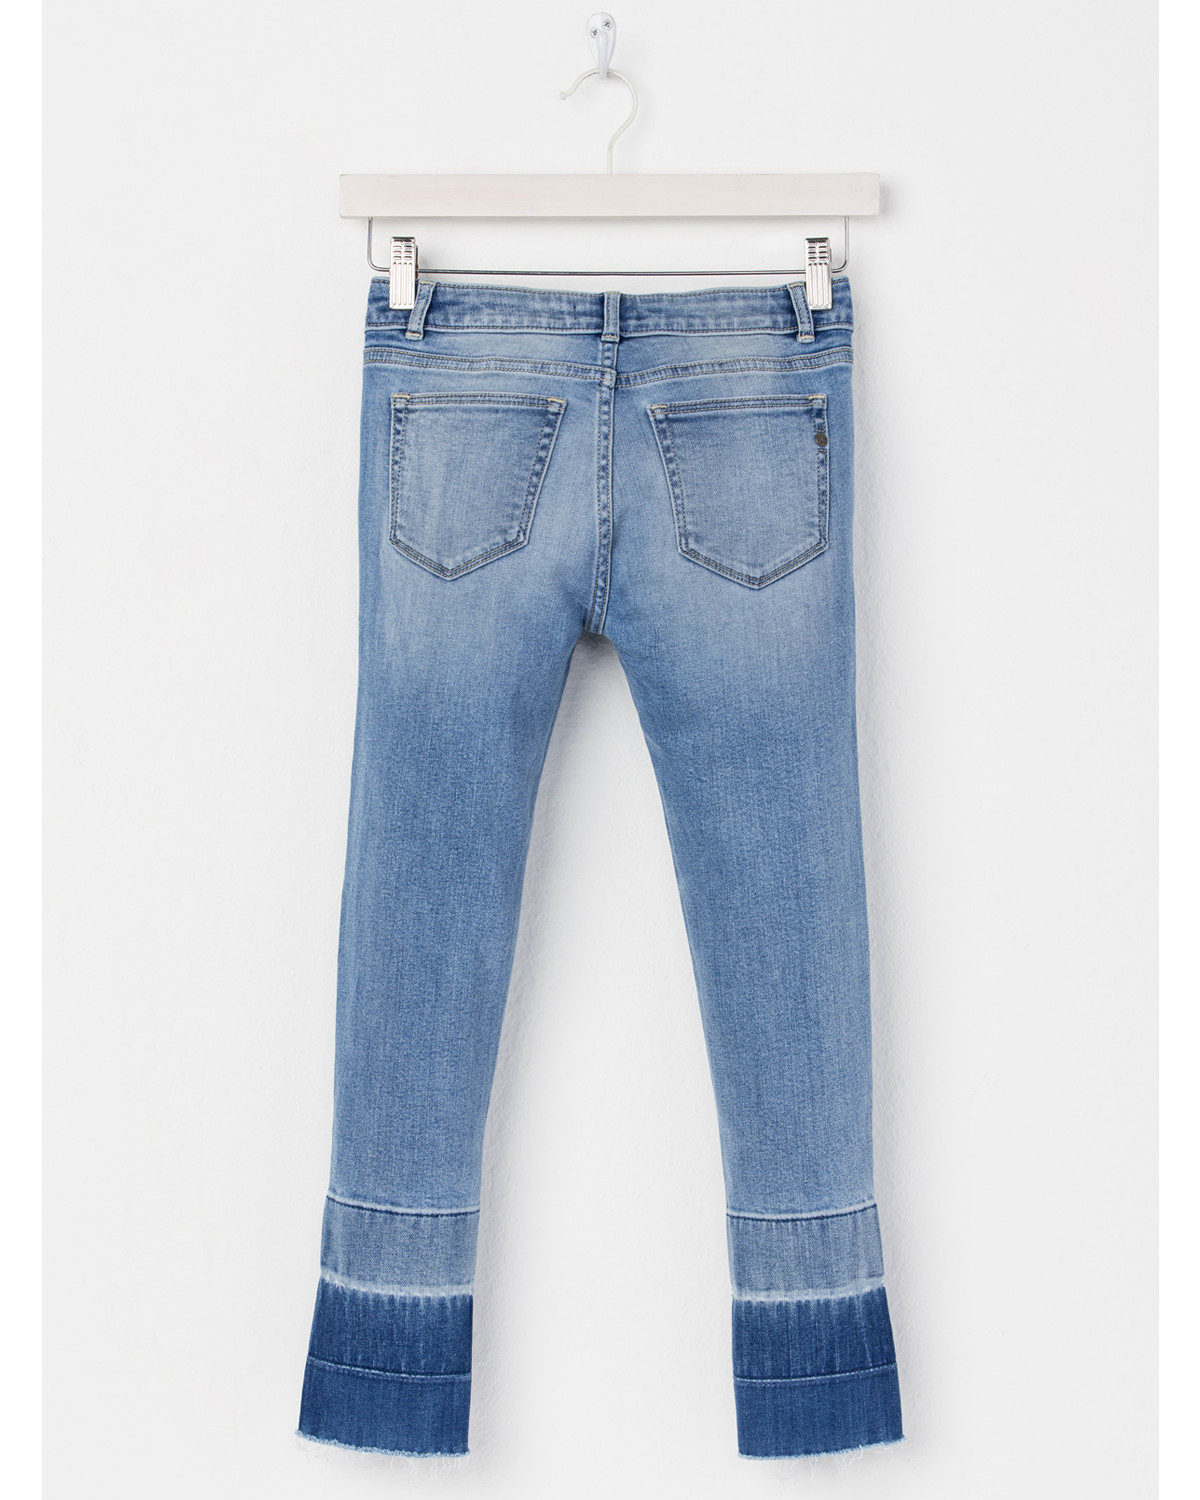 ankle cut skinny jeans